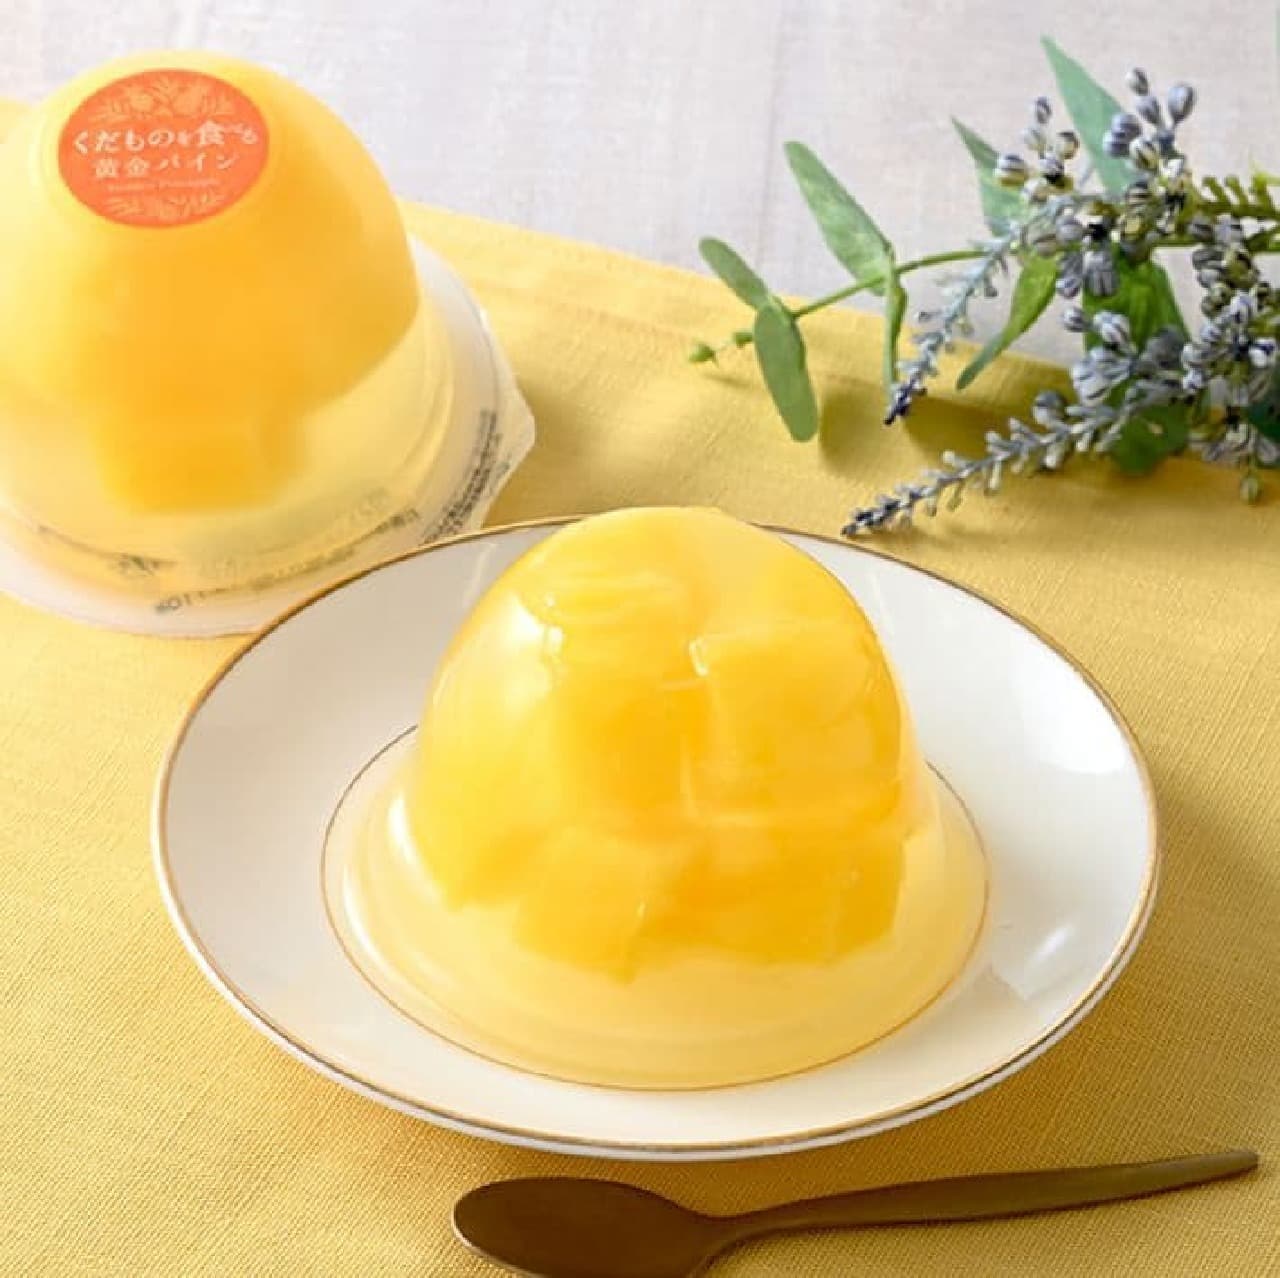 FamilyMart "Golden Pineapple Jelly with Fruits